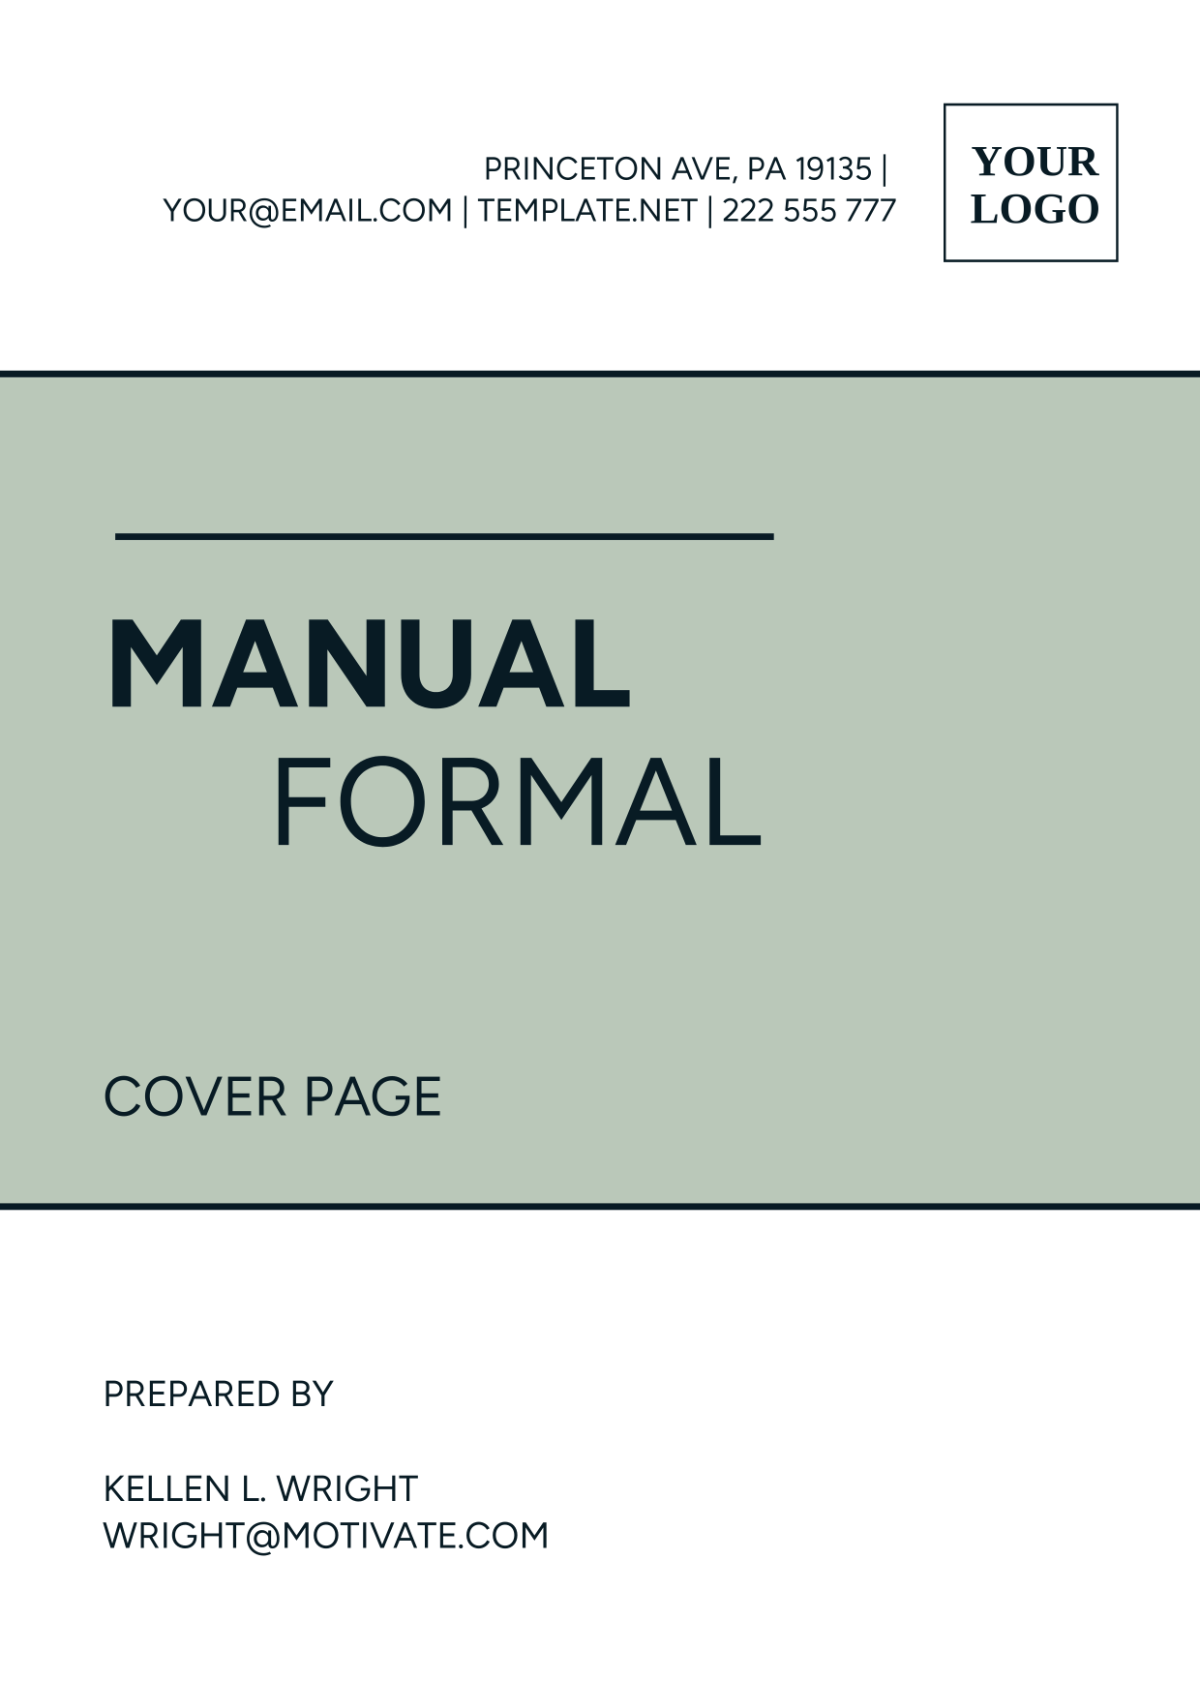 Manual Formal Cover Page Template